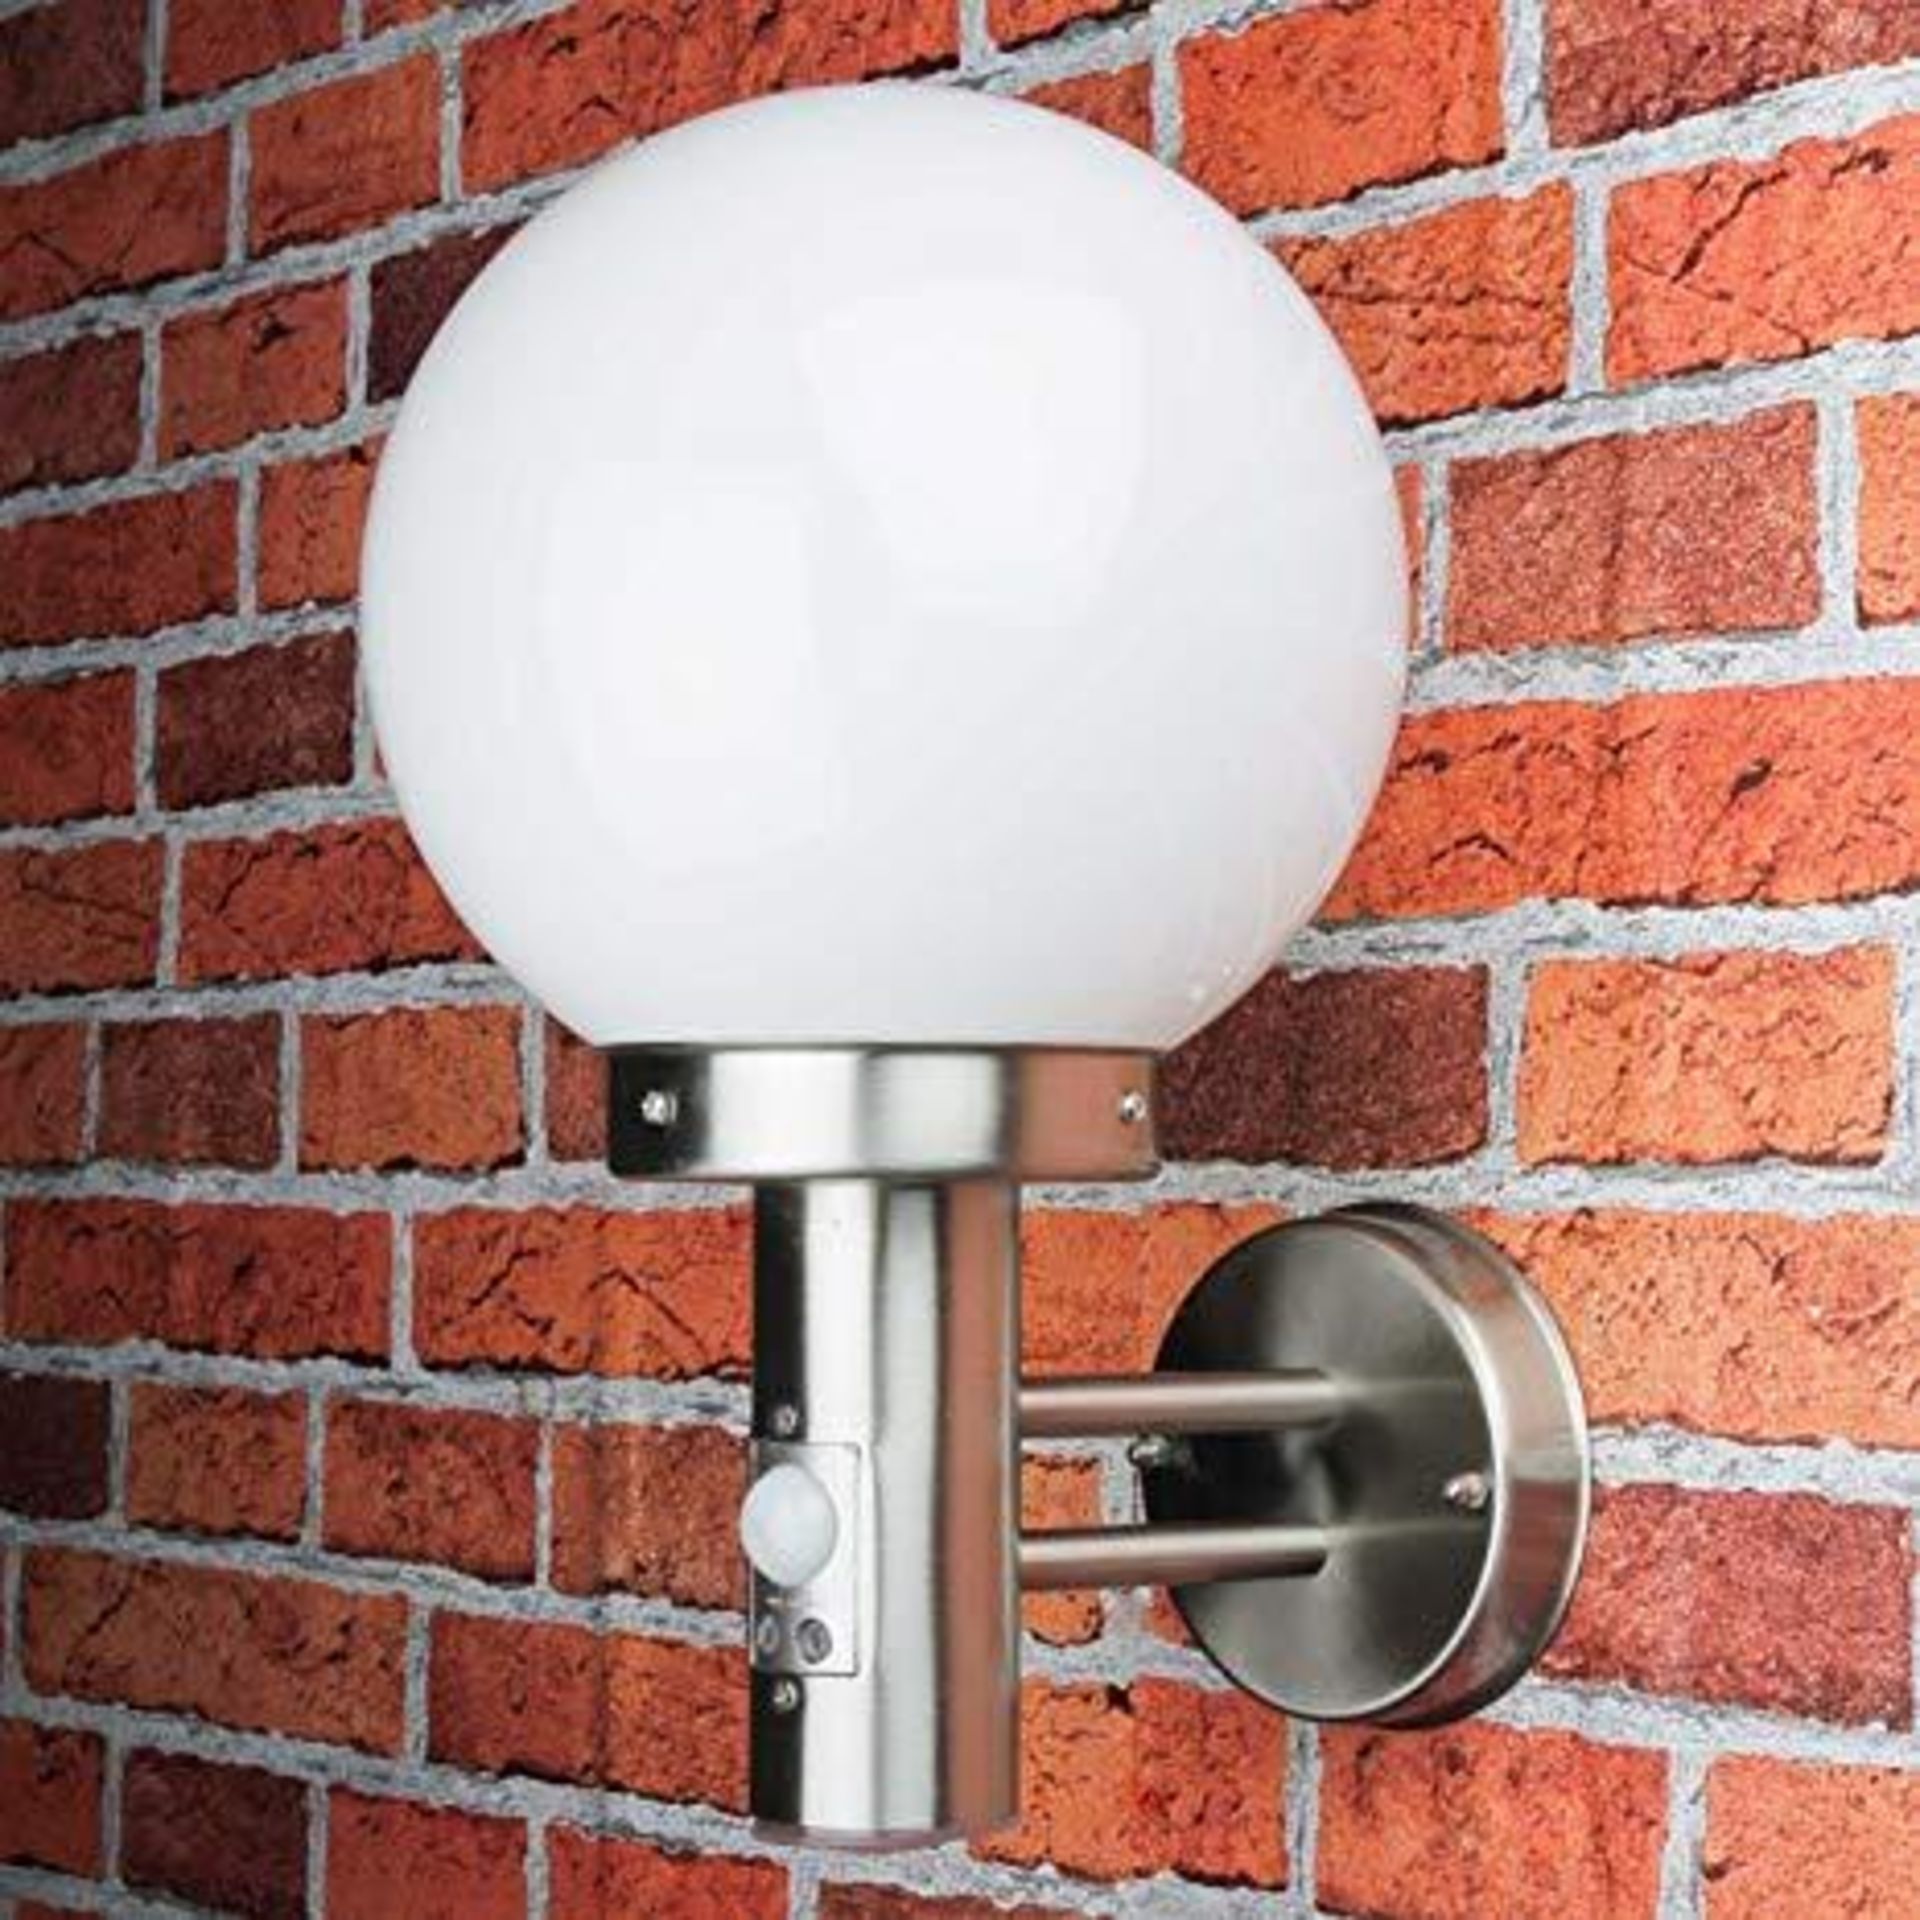 2 x Globe Outdoor Wall Light With PIR Motion Sensor - Stainless Steel With Polycarbonate Shade - IP4 - Image 4 of 5